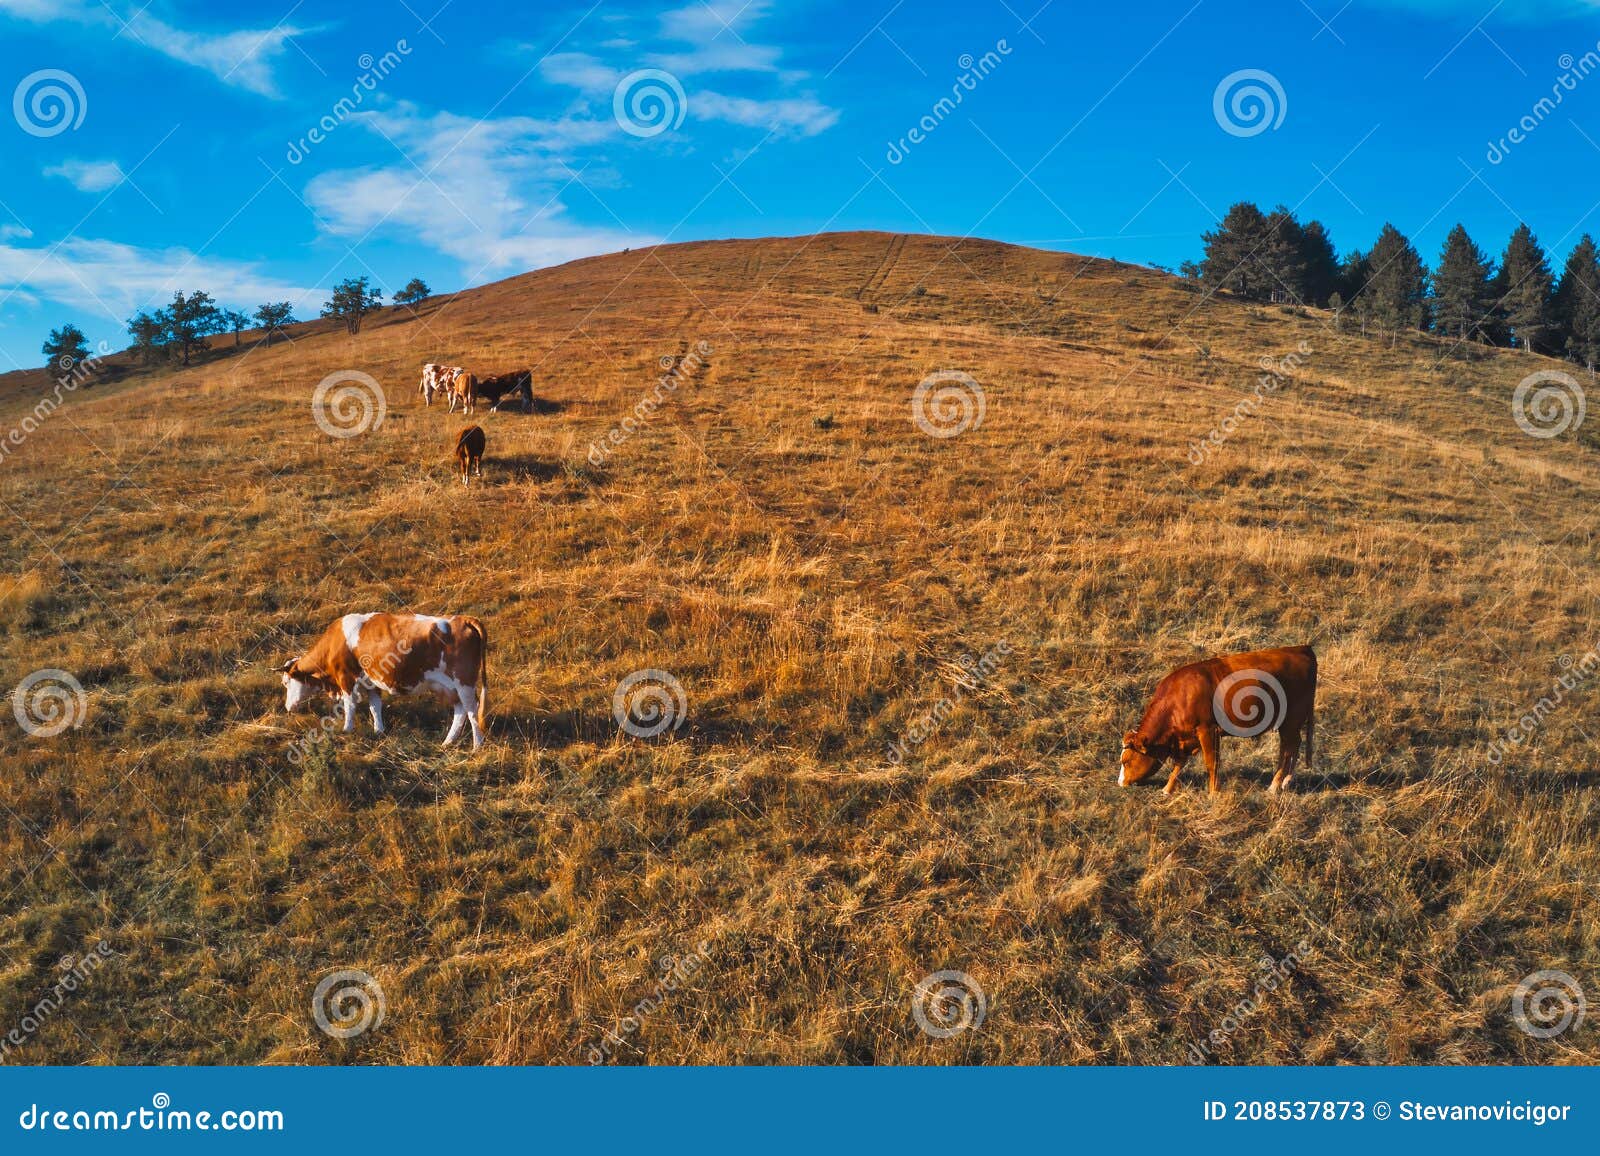 herd of cows is grazing on pastureland hill slope